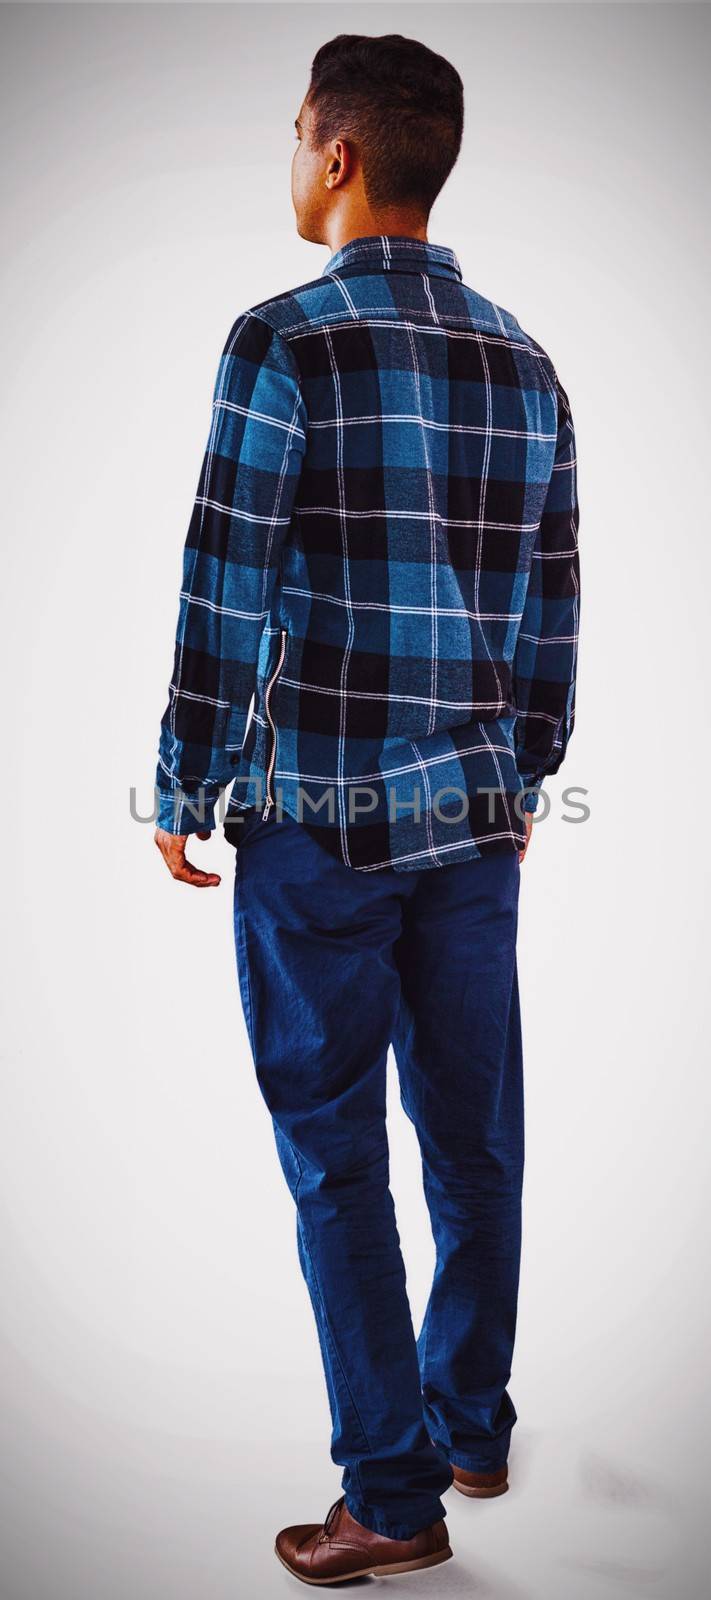 Full length of man looking away against white background